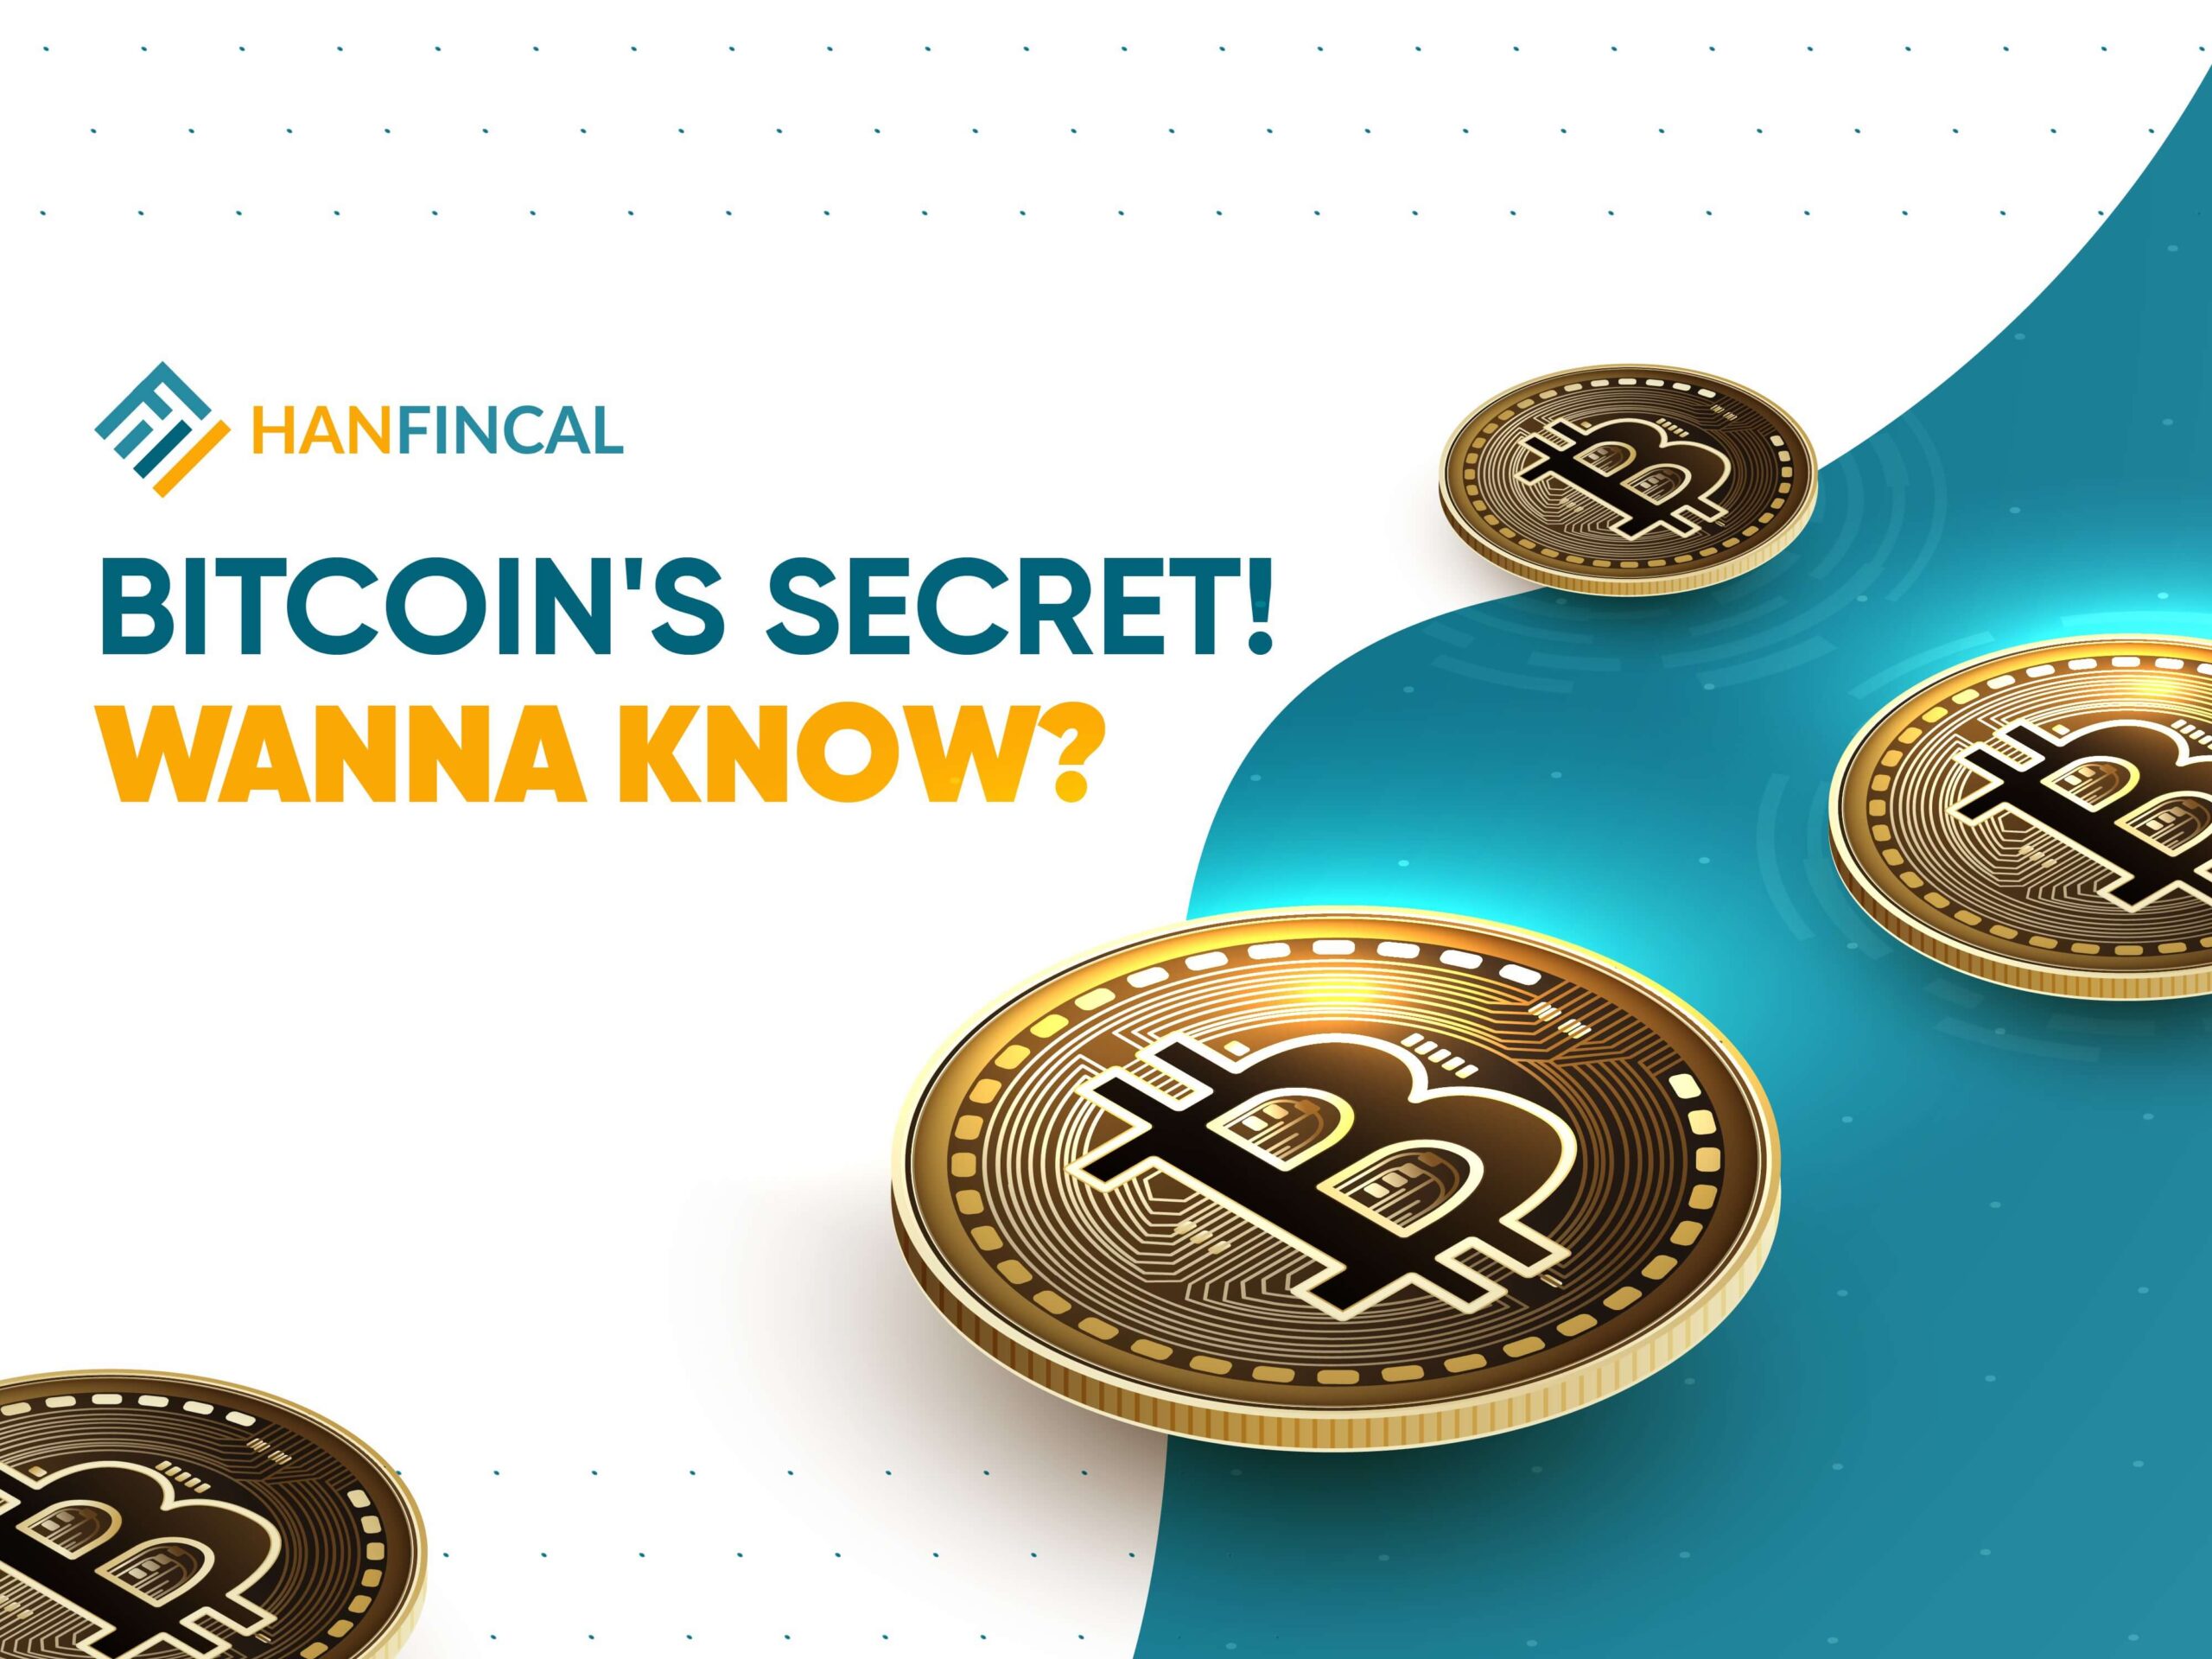 Why Is Bitcoin Going Up? – The Fascinating Secrets Behind